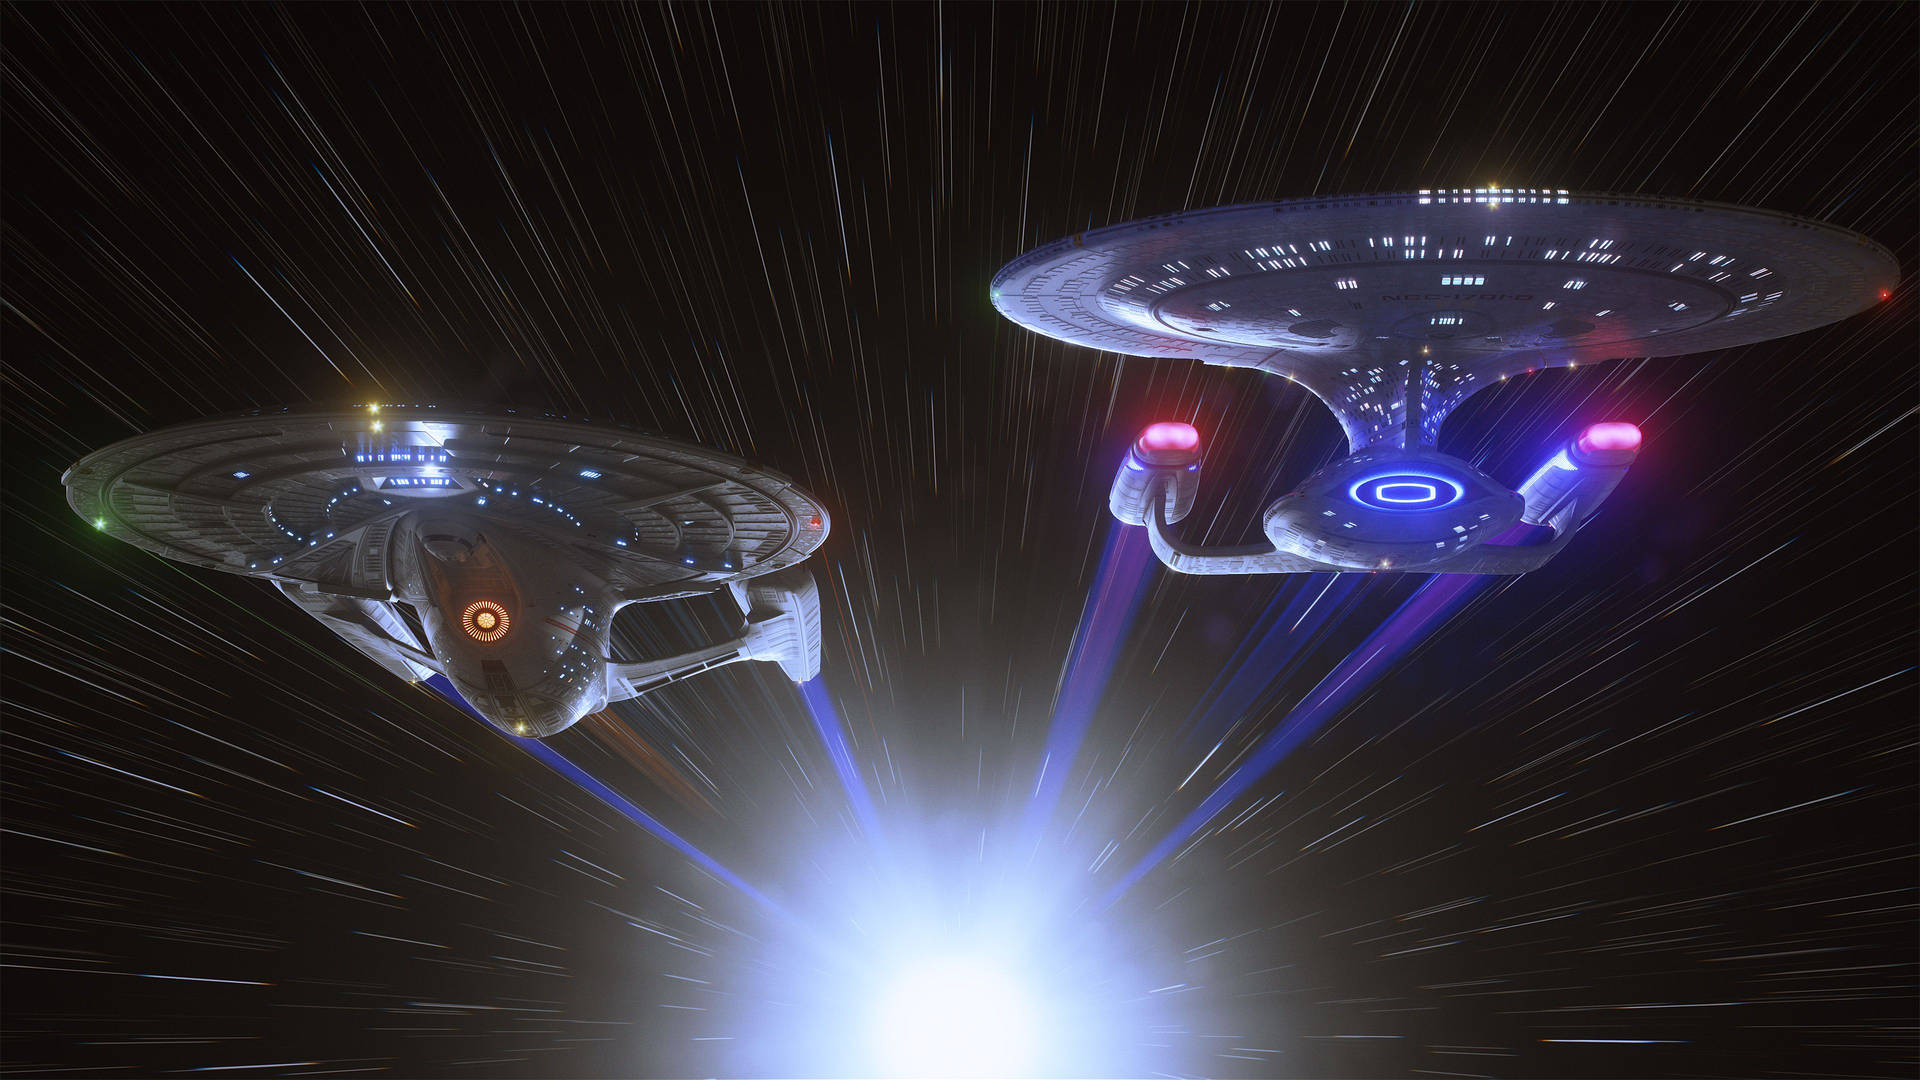 Stunning wallpaper of space travel of Star Trek ships in outer space